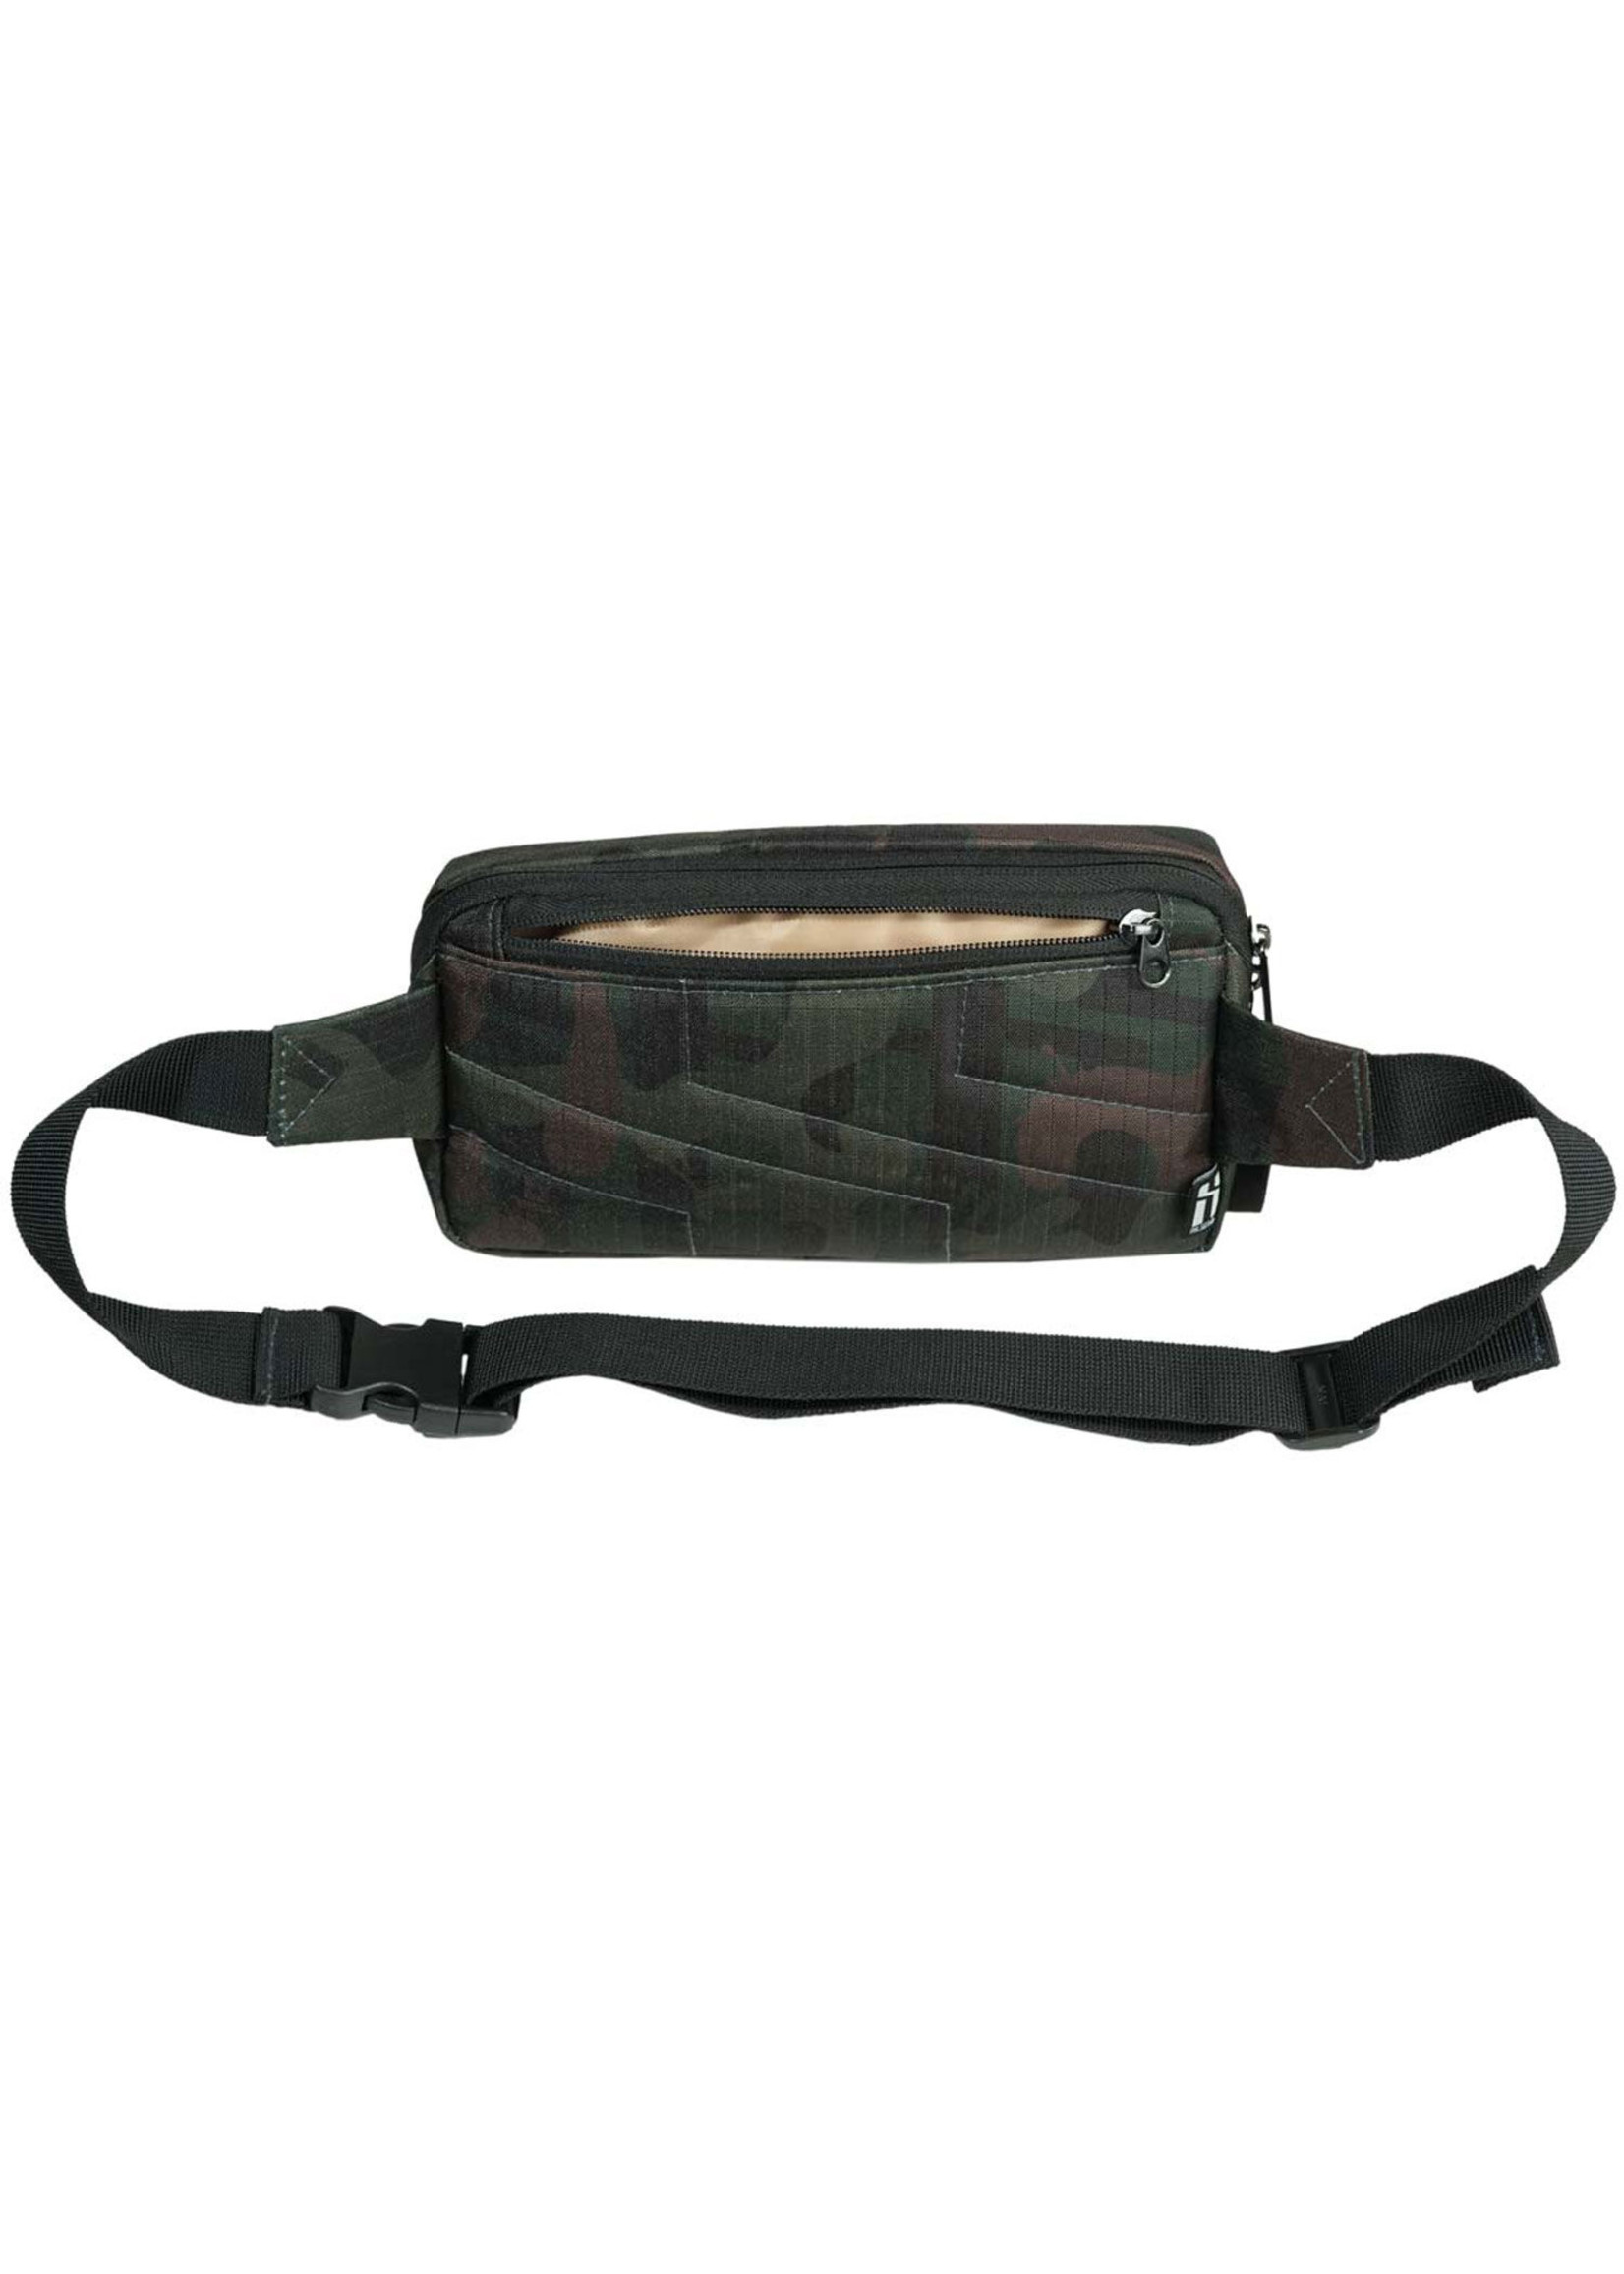 Mr. Serious  Mr. Serious Essential hip bag olive